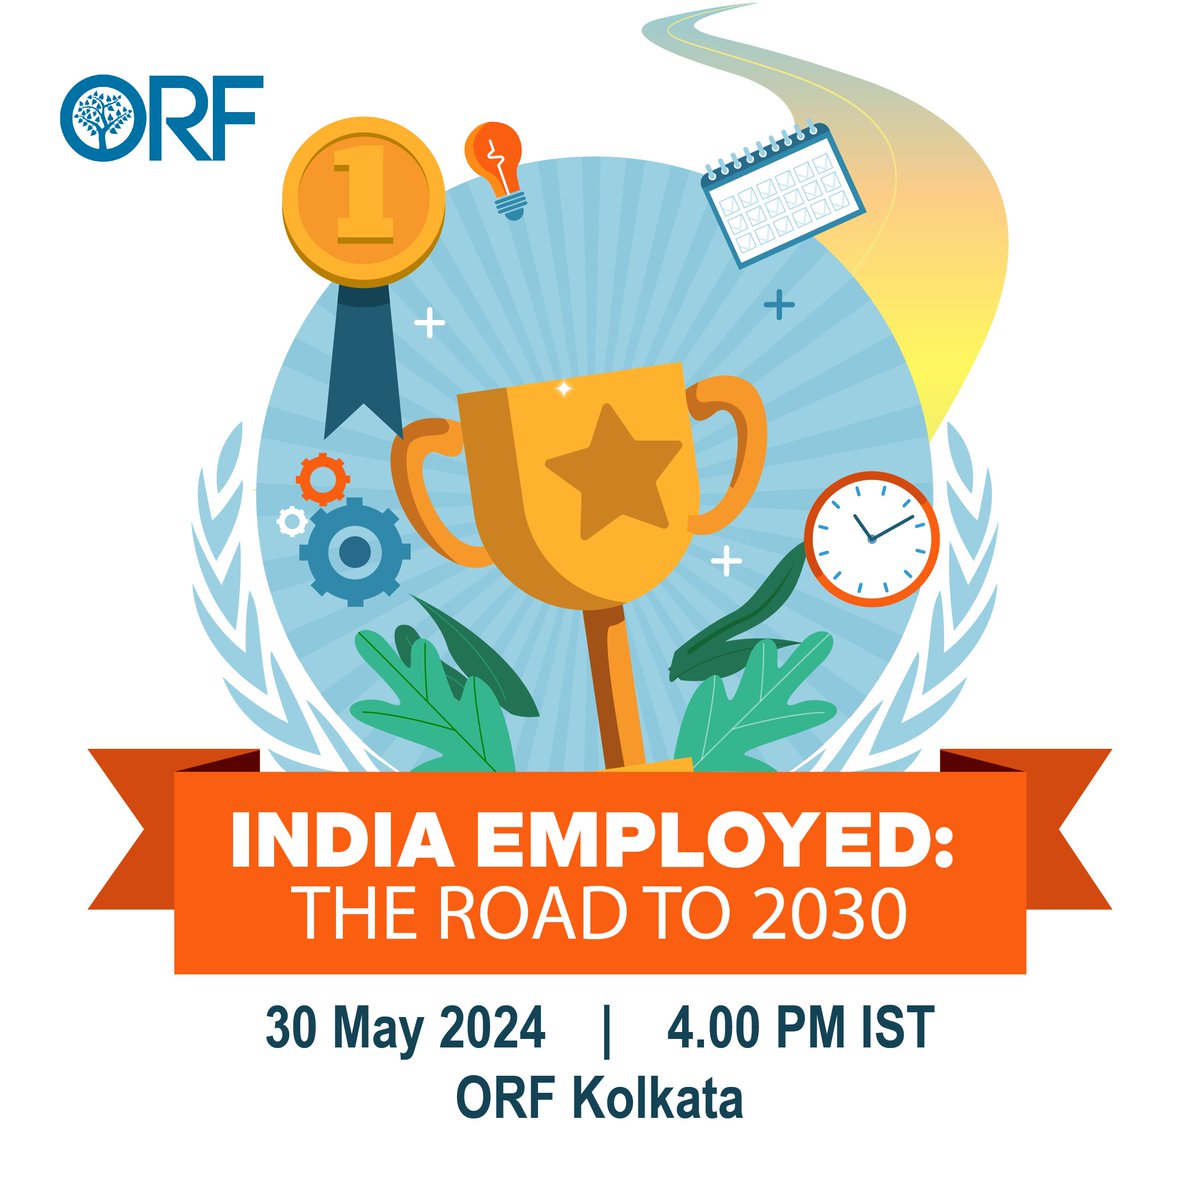 .@ORFKolkata is hosting a discussion 'India Employed: the road to 2030' featuring @DrNilanjanG, Alakananda Ghosh, Ambarish Dasgupta, @meerashenoy, & Biswatosh Saha 30 May | 4:00PM This is an in-person event RSPV: megha.dutta10@gmail.com Know more: or-f.org/27501